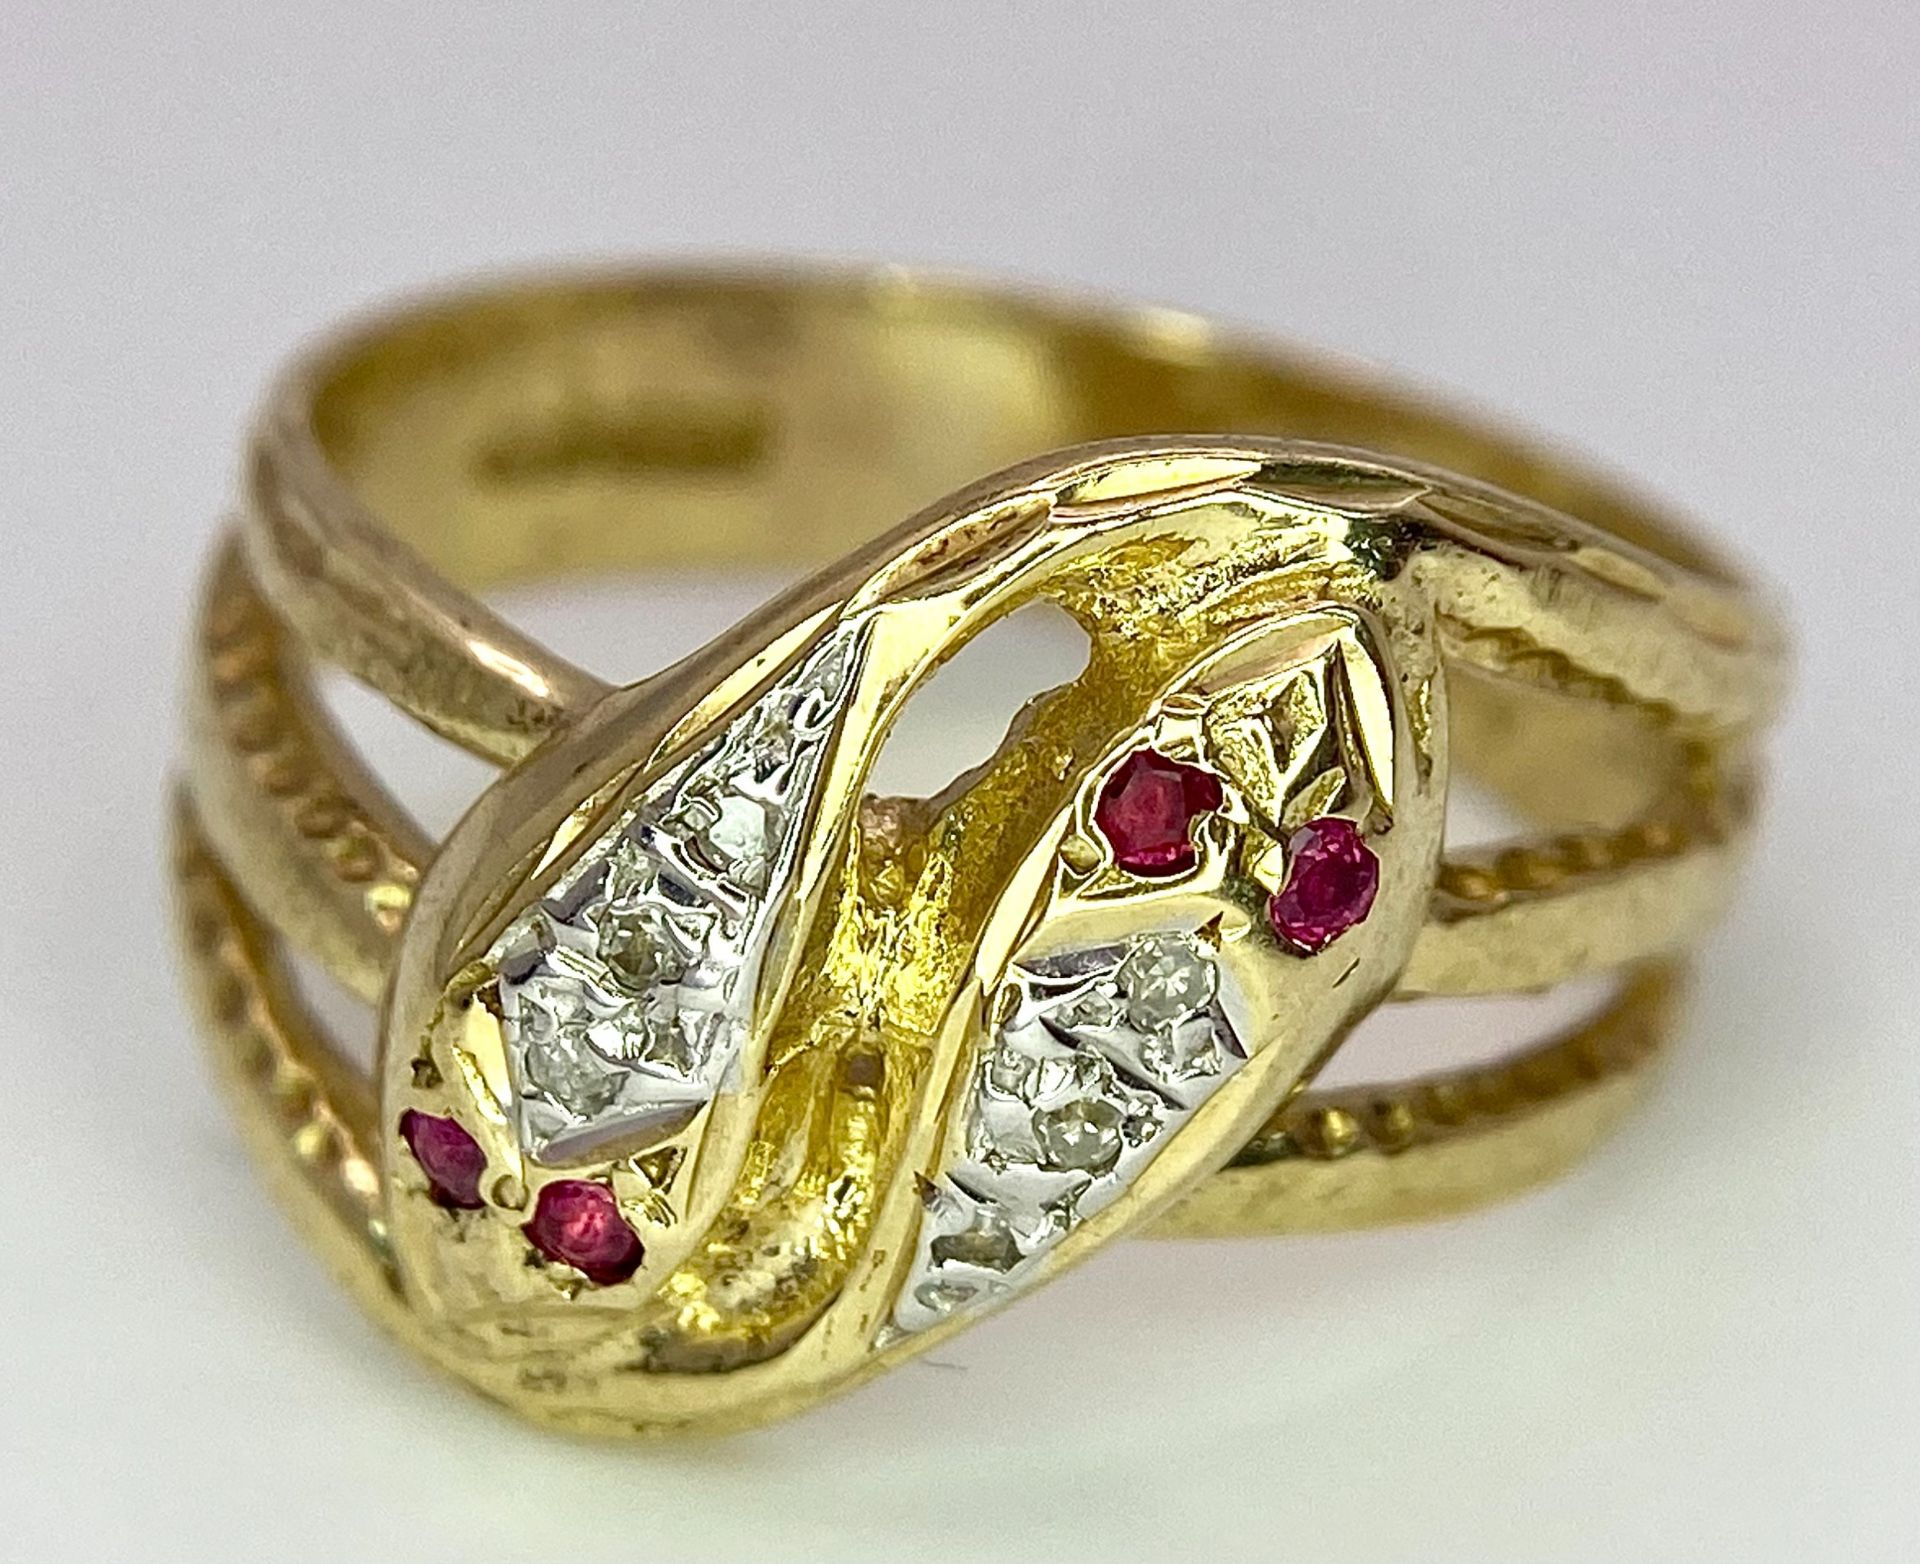 A 9K YELLOW GOLD DIAMOND & RUBY DOUBLE SERPENT RING! 5.3G. SIZE Q. - Image 4 of 6